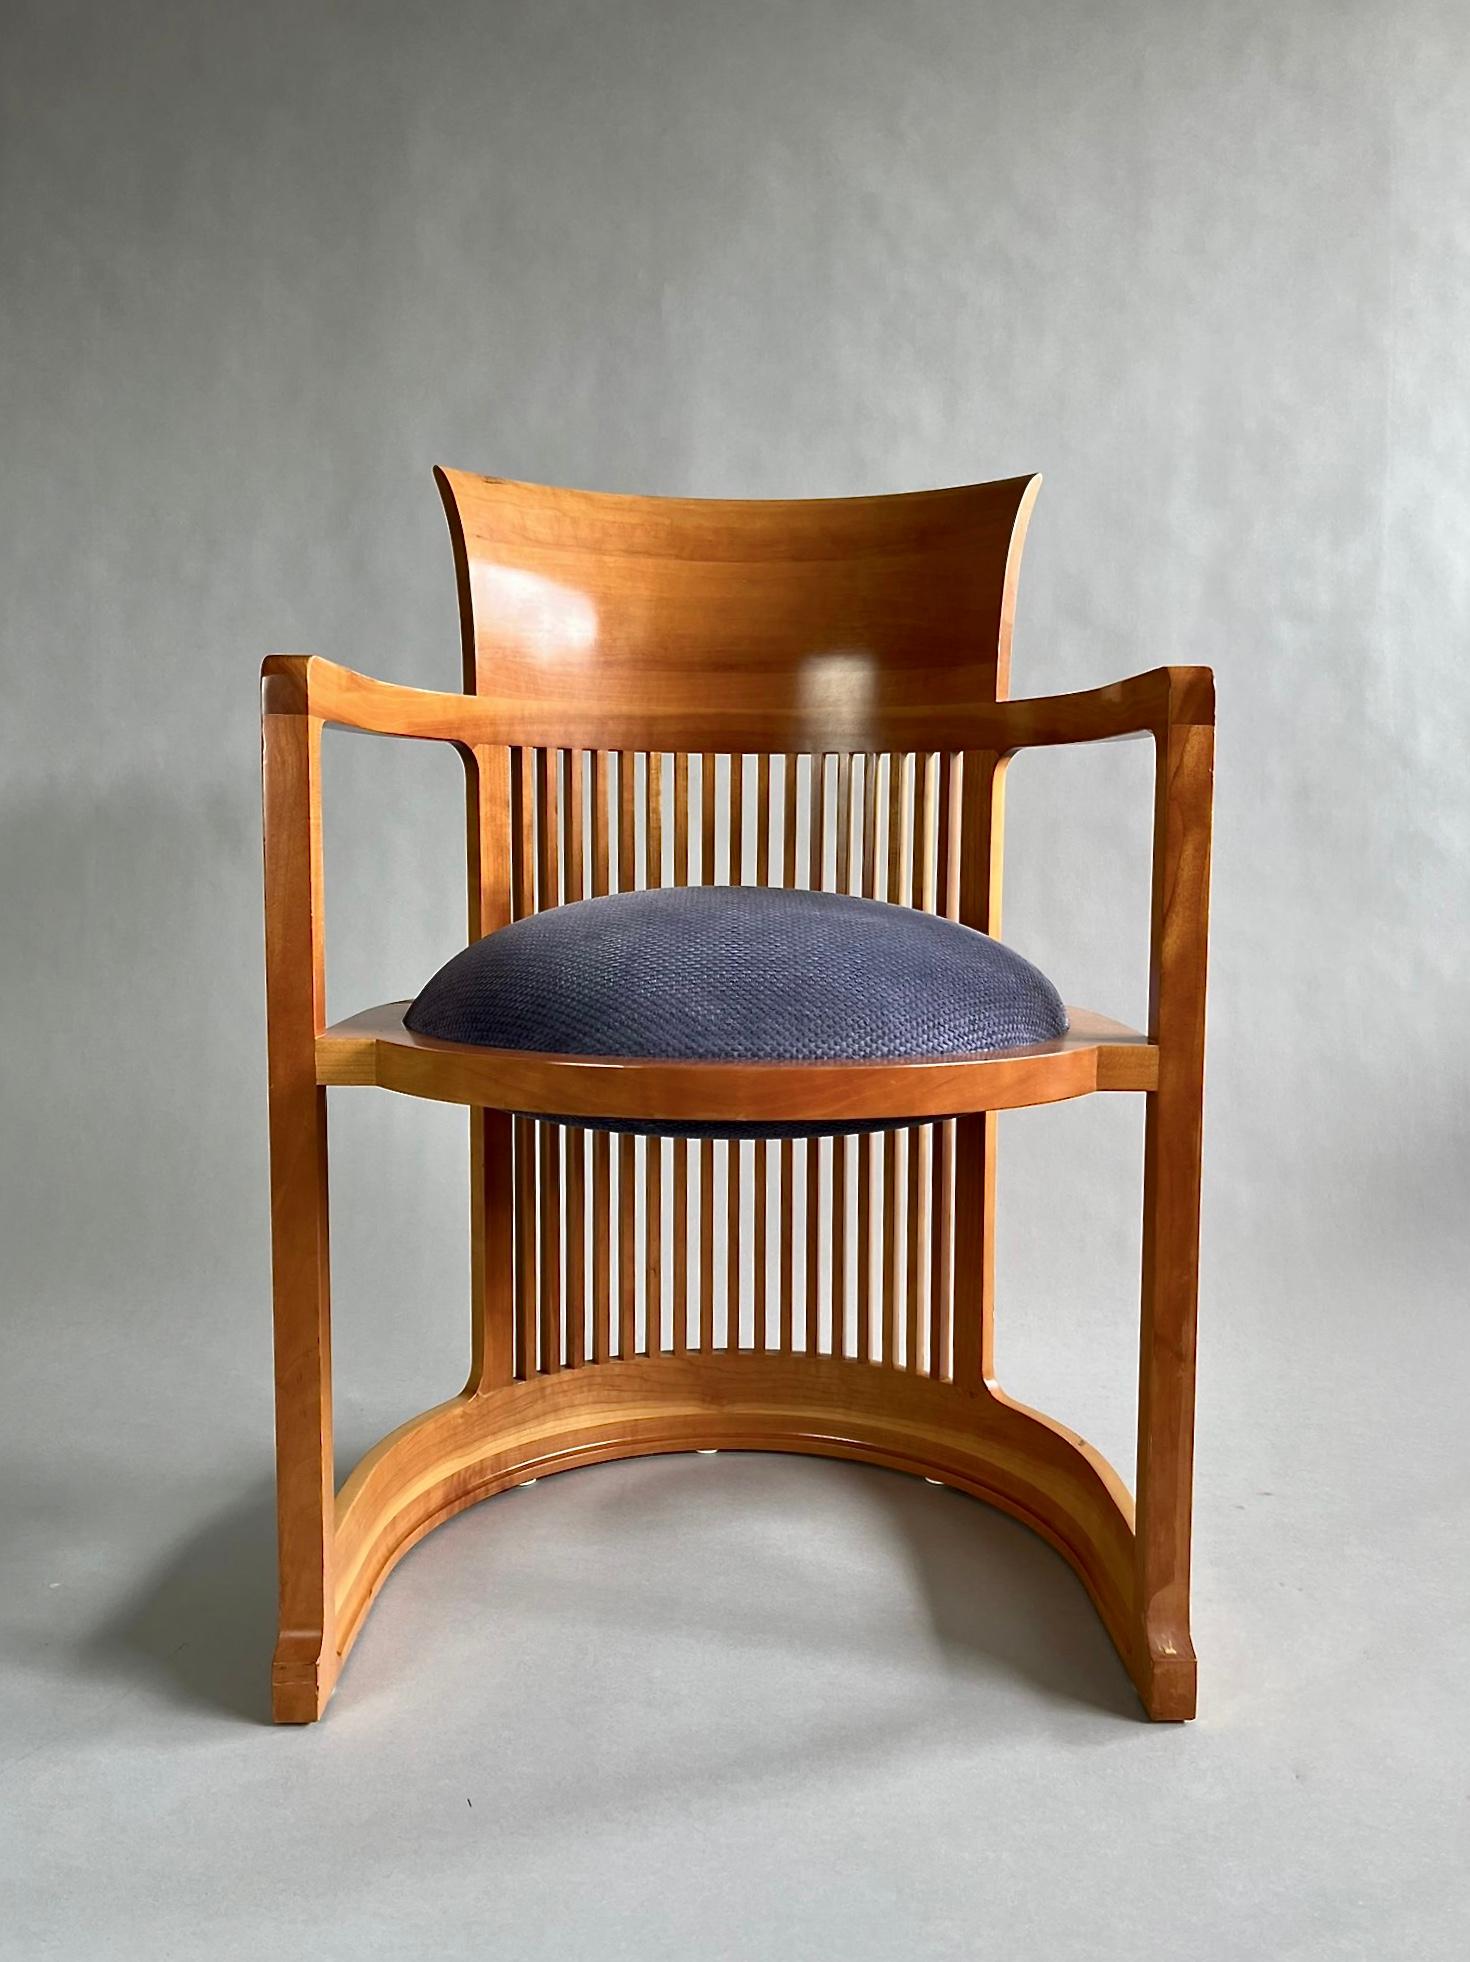 Set of four early edition Iconic Barrel chairs designed by Frank Lloyd Wright in 1937 and produced by Cassina Italy in the late 1980's early 1990's. The set is in good vintage condition as can be seen in the images.
The four chairs will be shipped